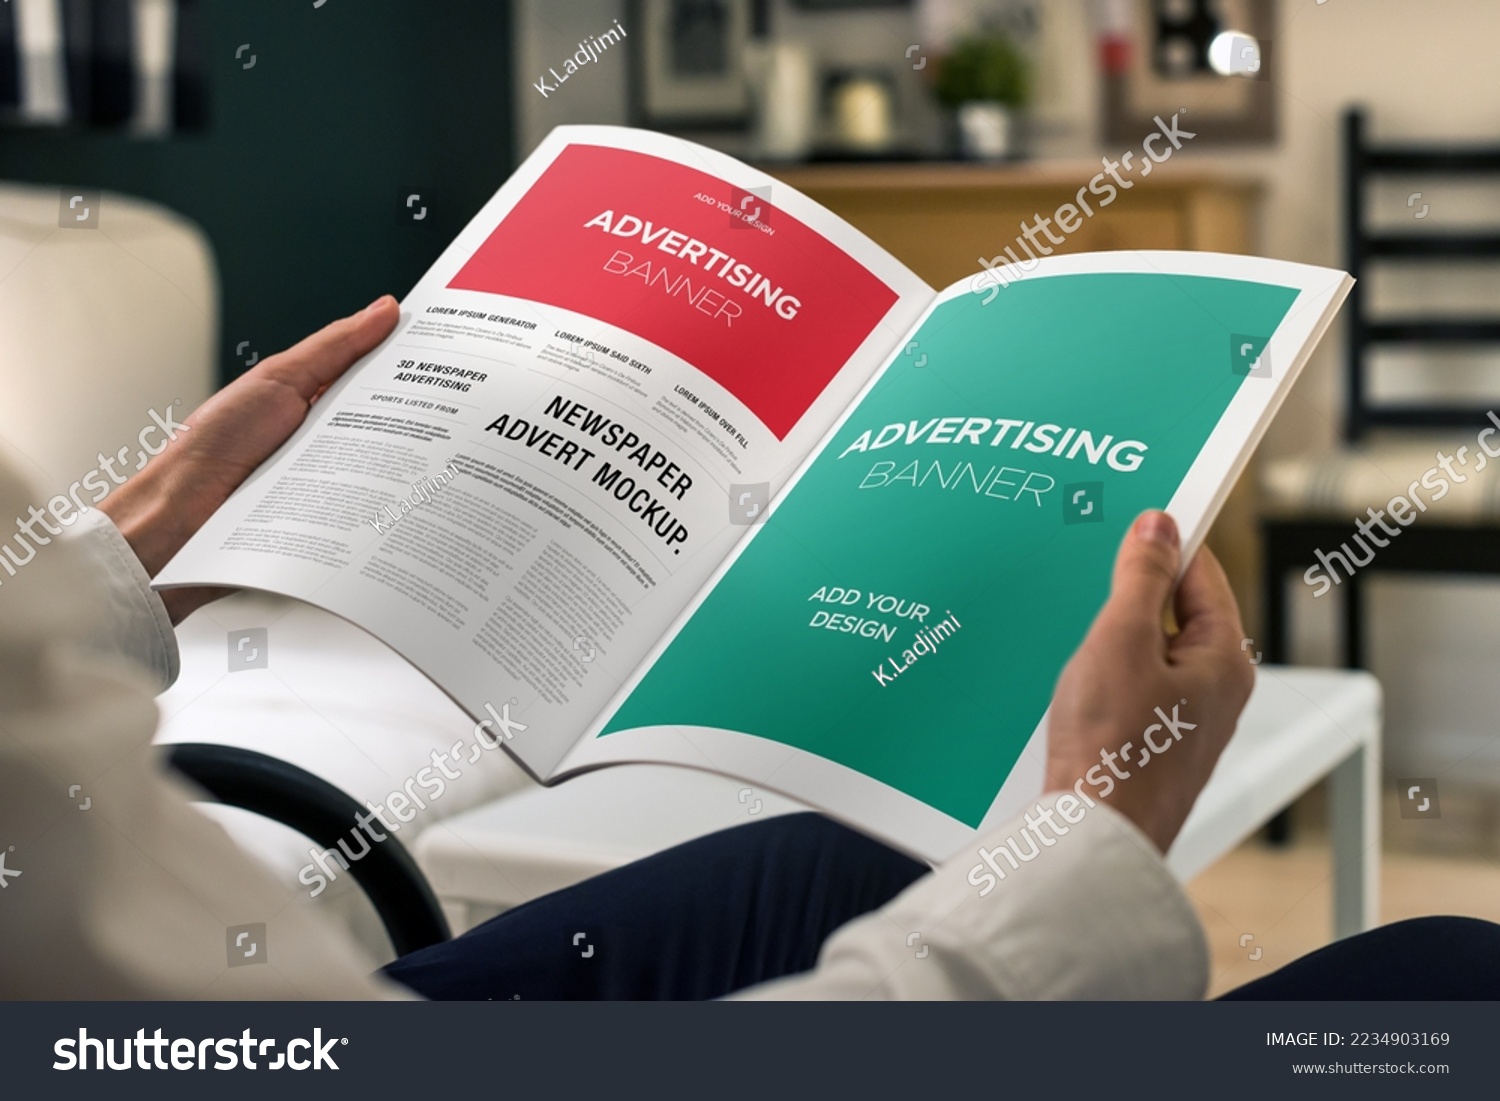 Advertising Banner on Magazine, Brochure Mockup With Hands #2234903169